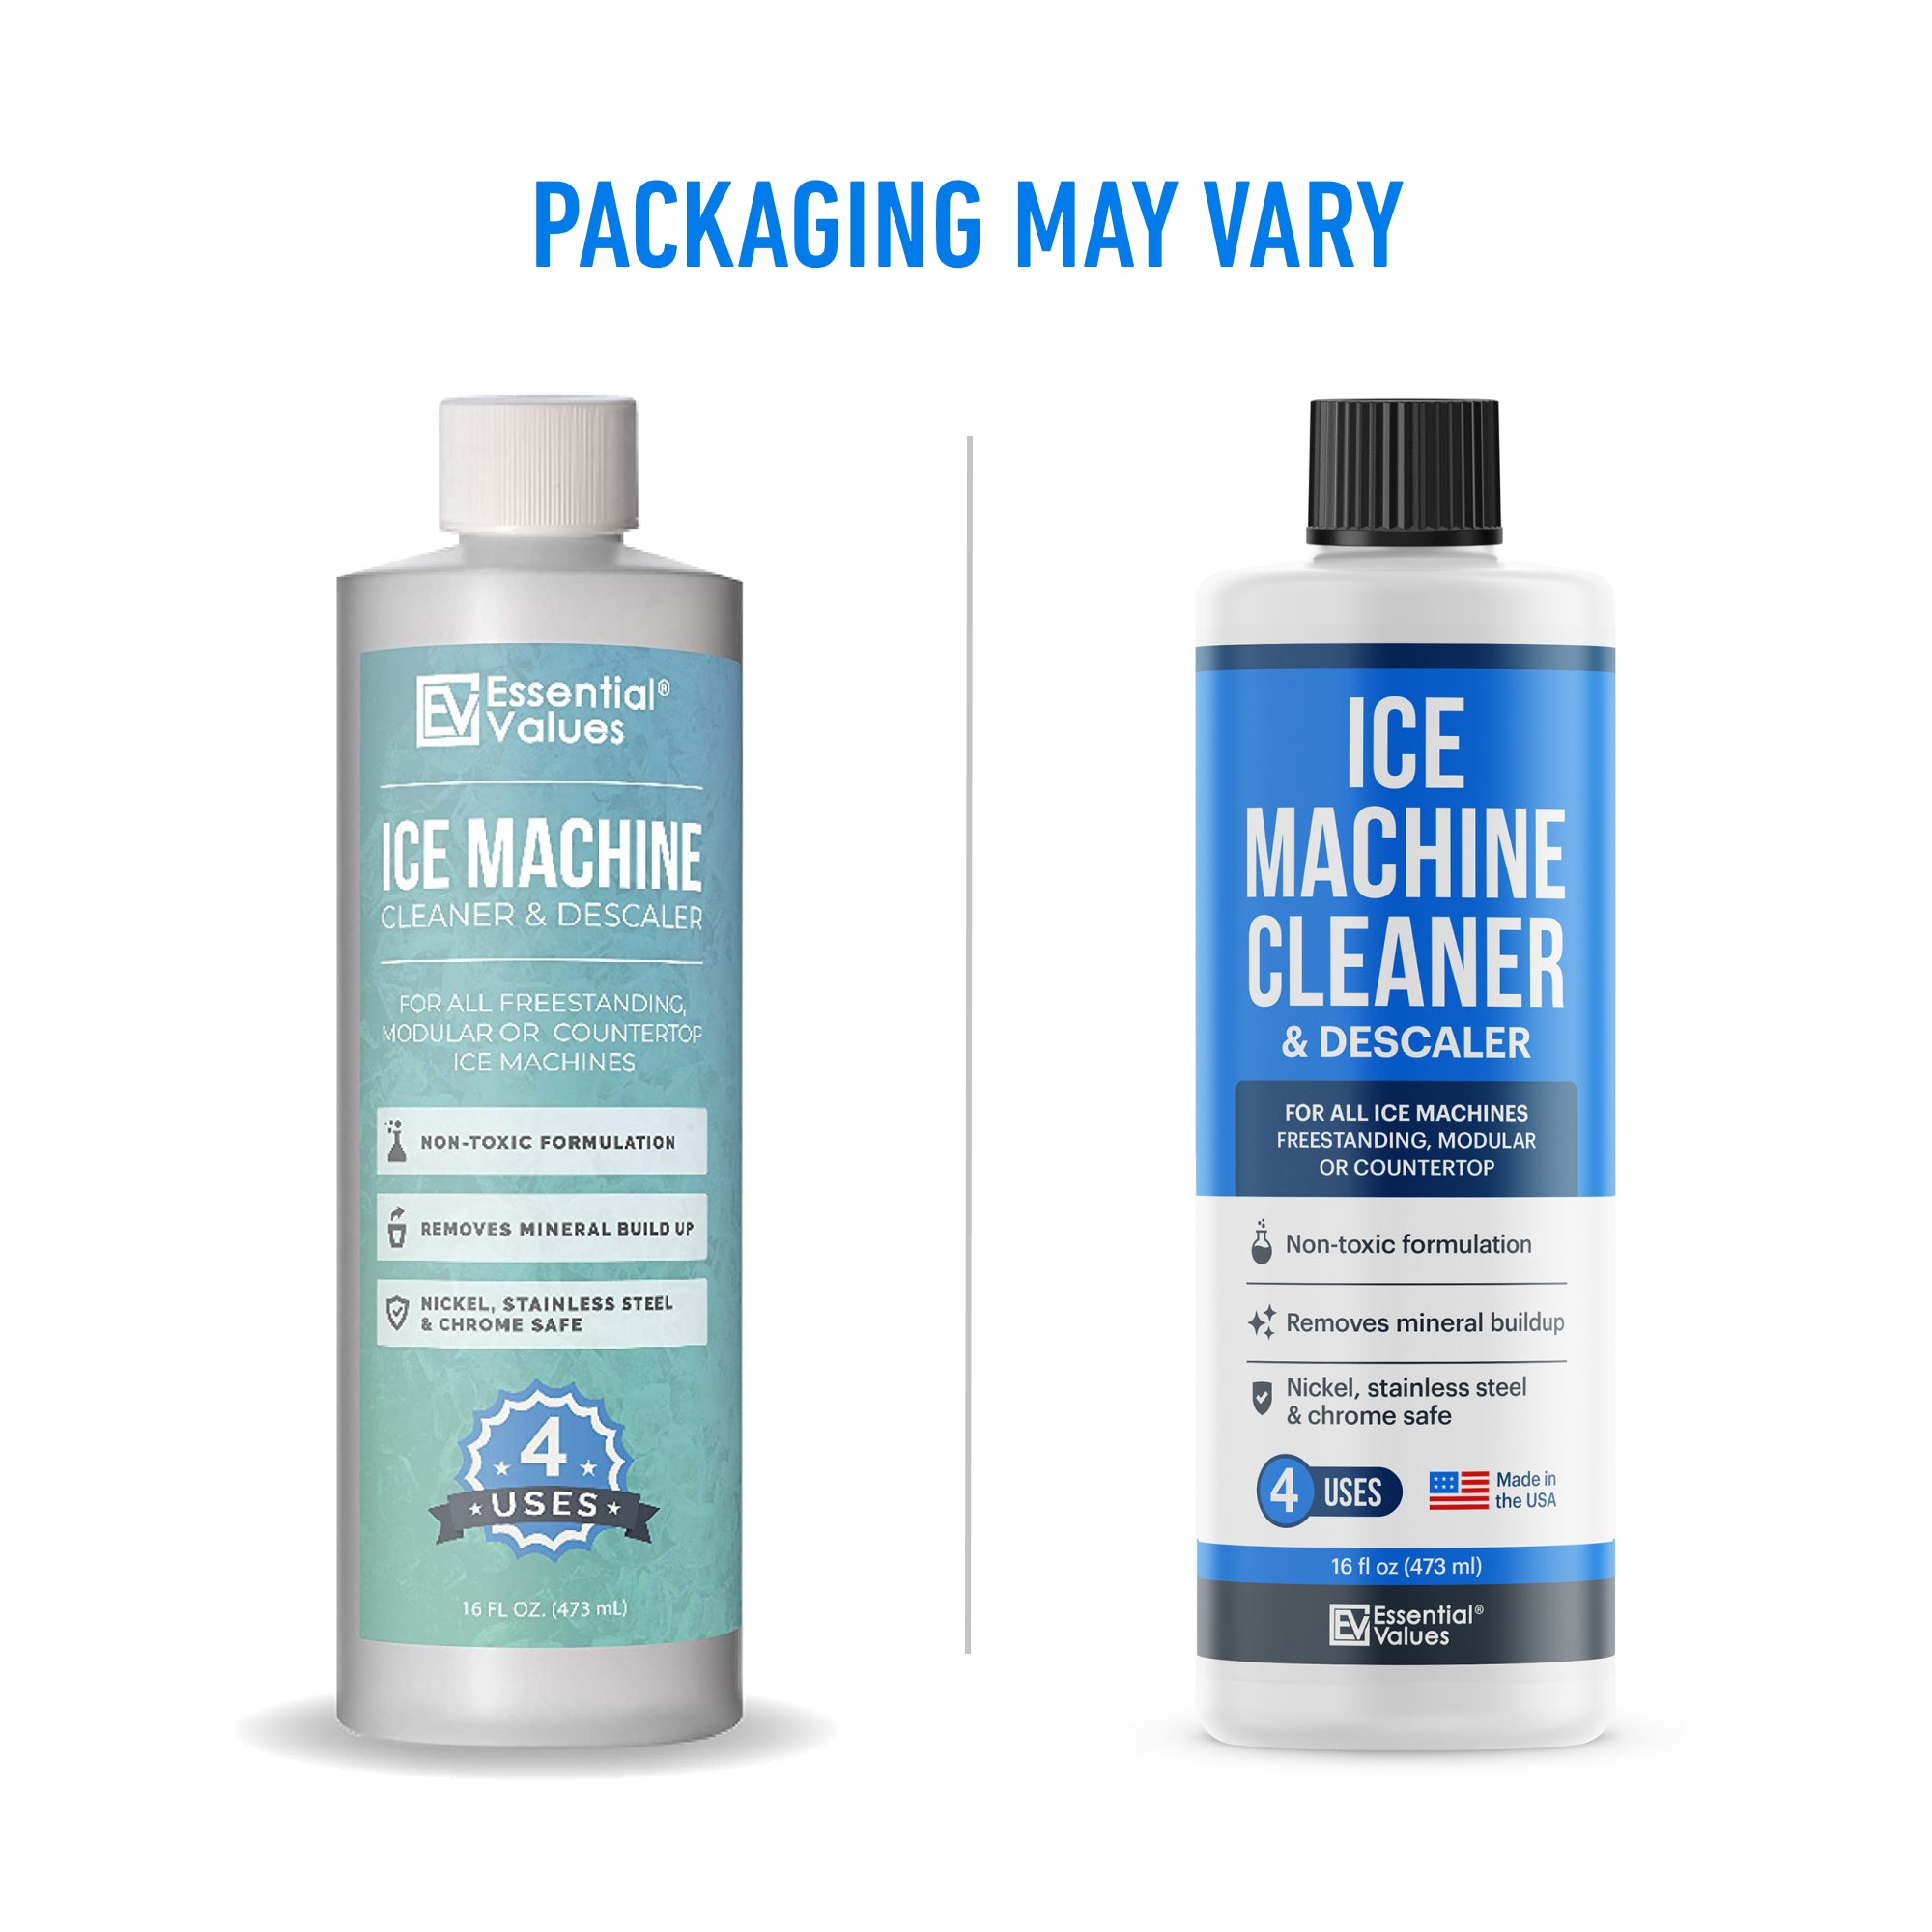 ice machine cleaning using NuCalgon nickel safe cleaner #icemachine 